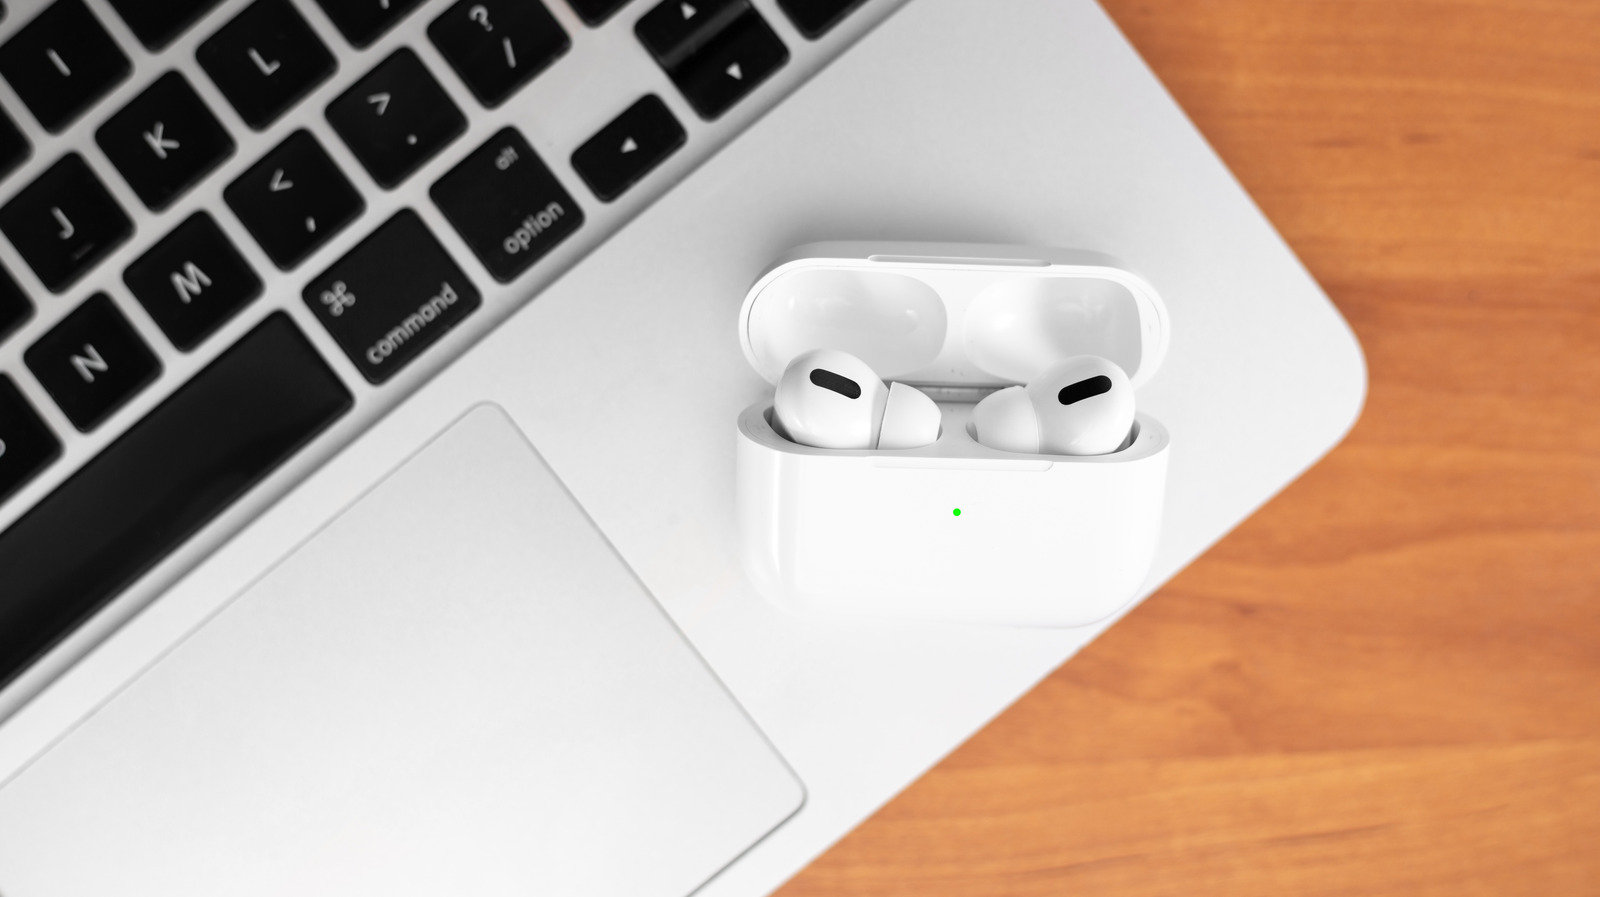 How To Pair Your Apple AirPods To Your Mac Laptop